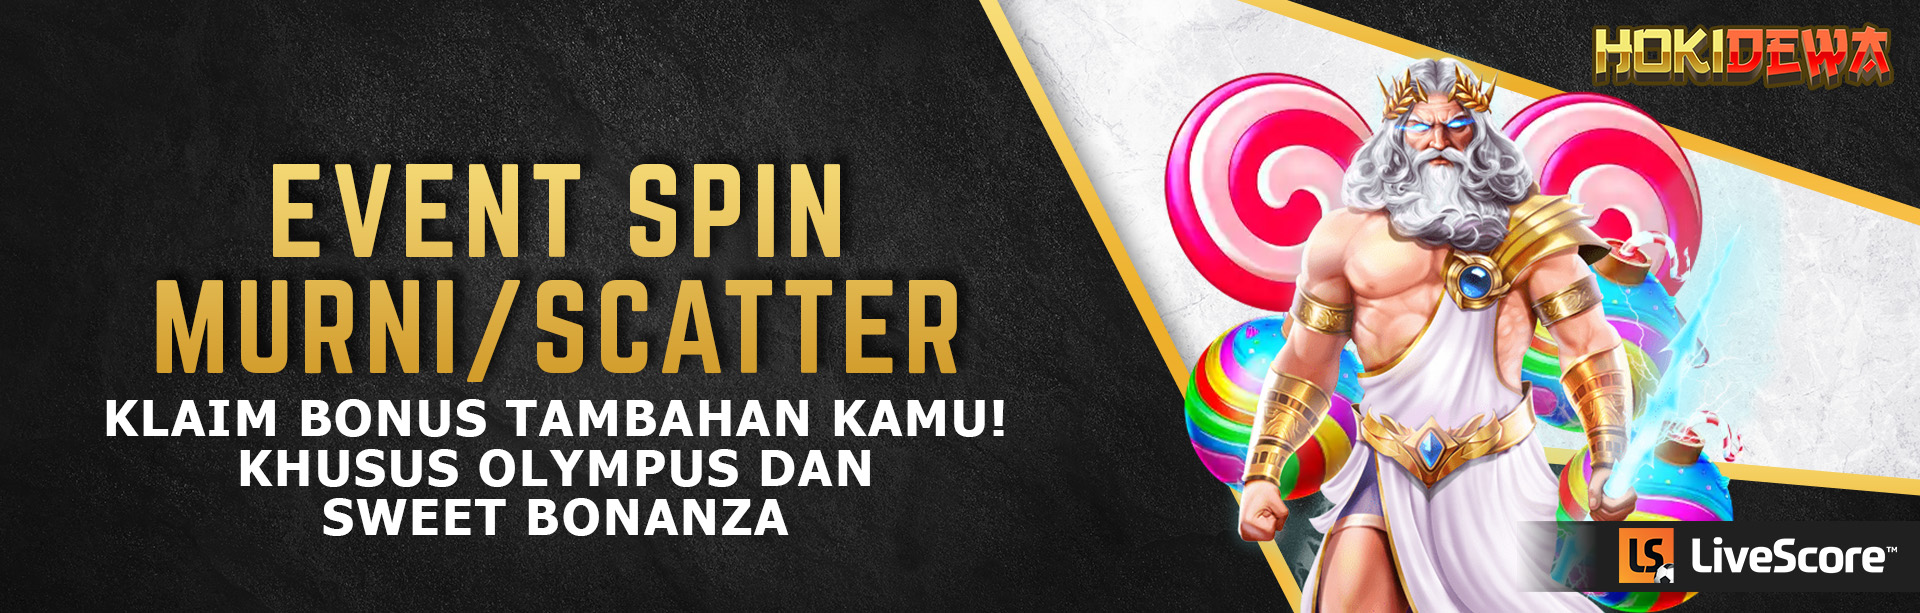 Event spin murni/scatter pragmatic play